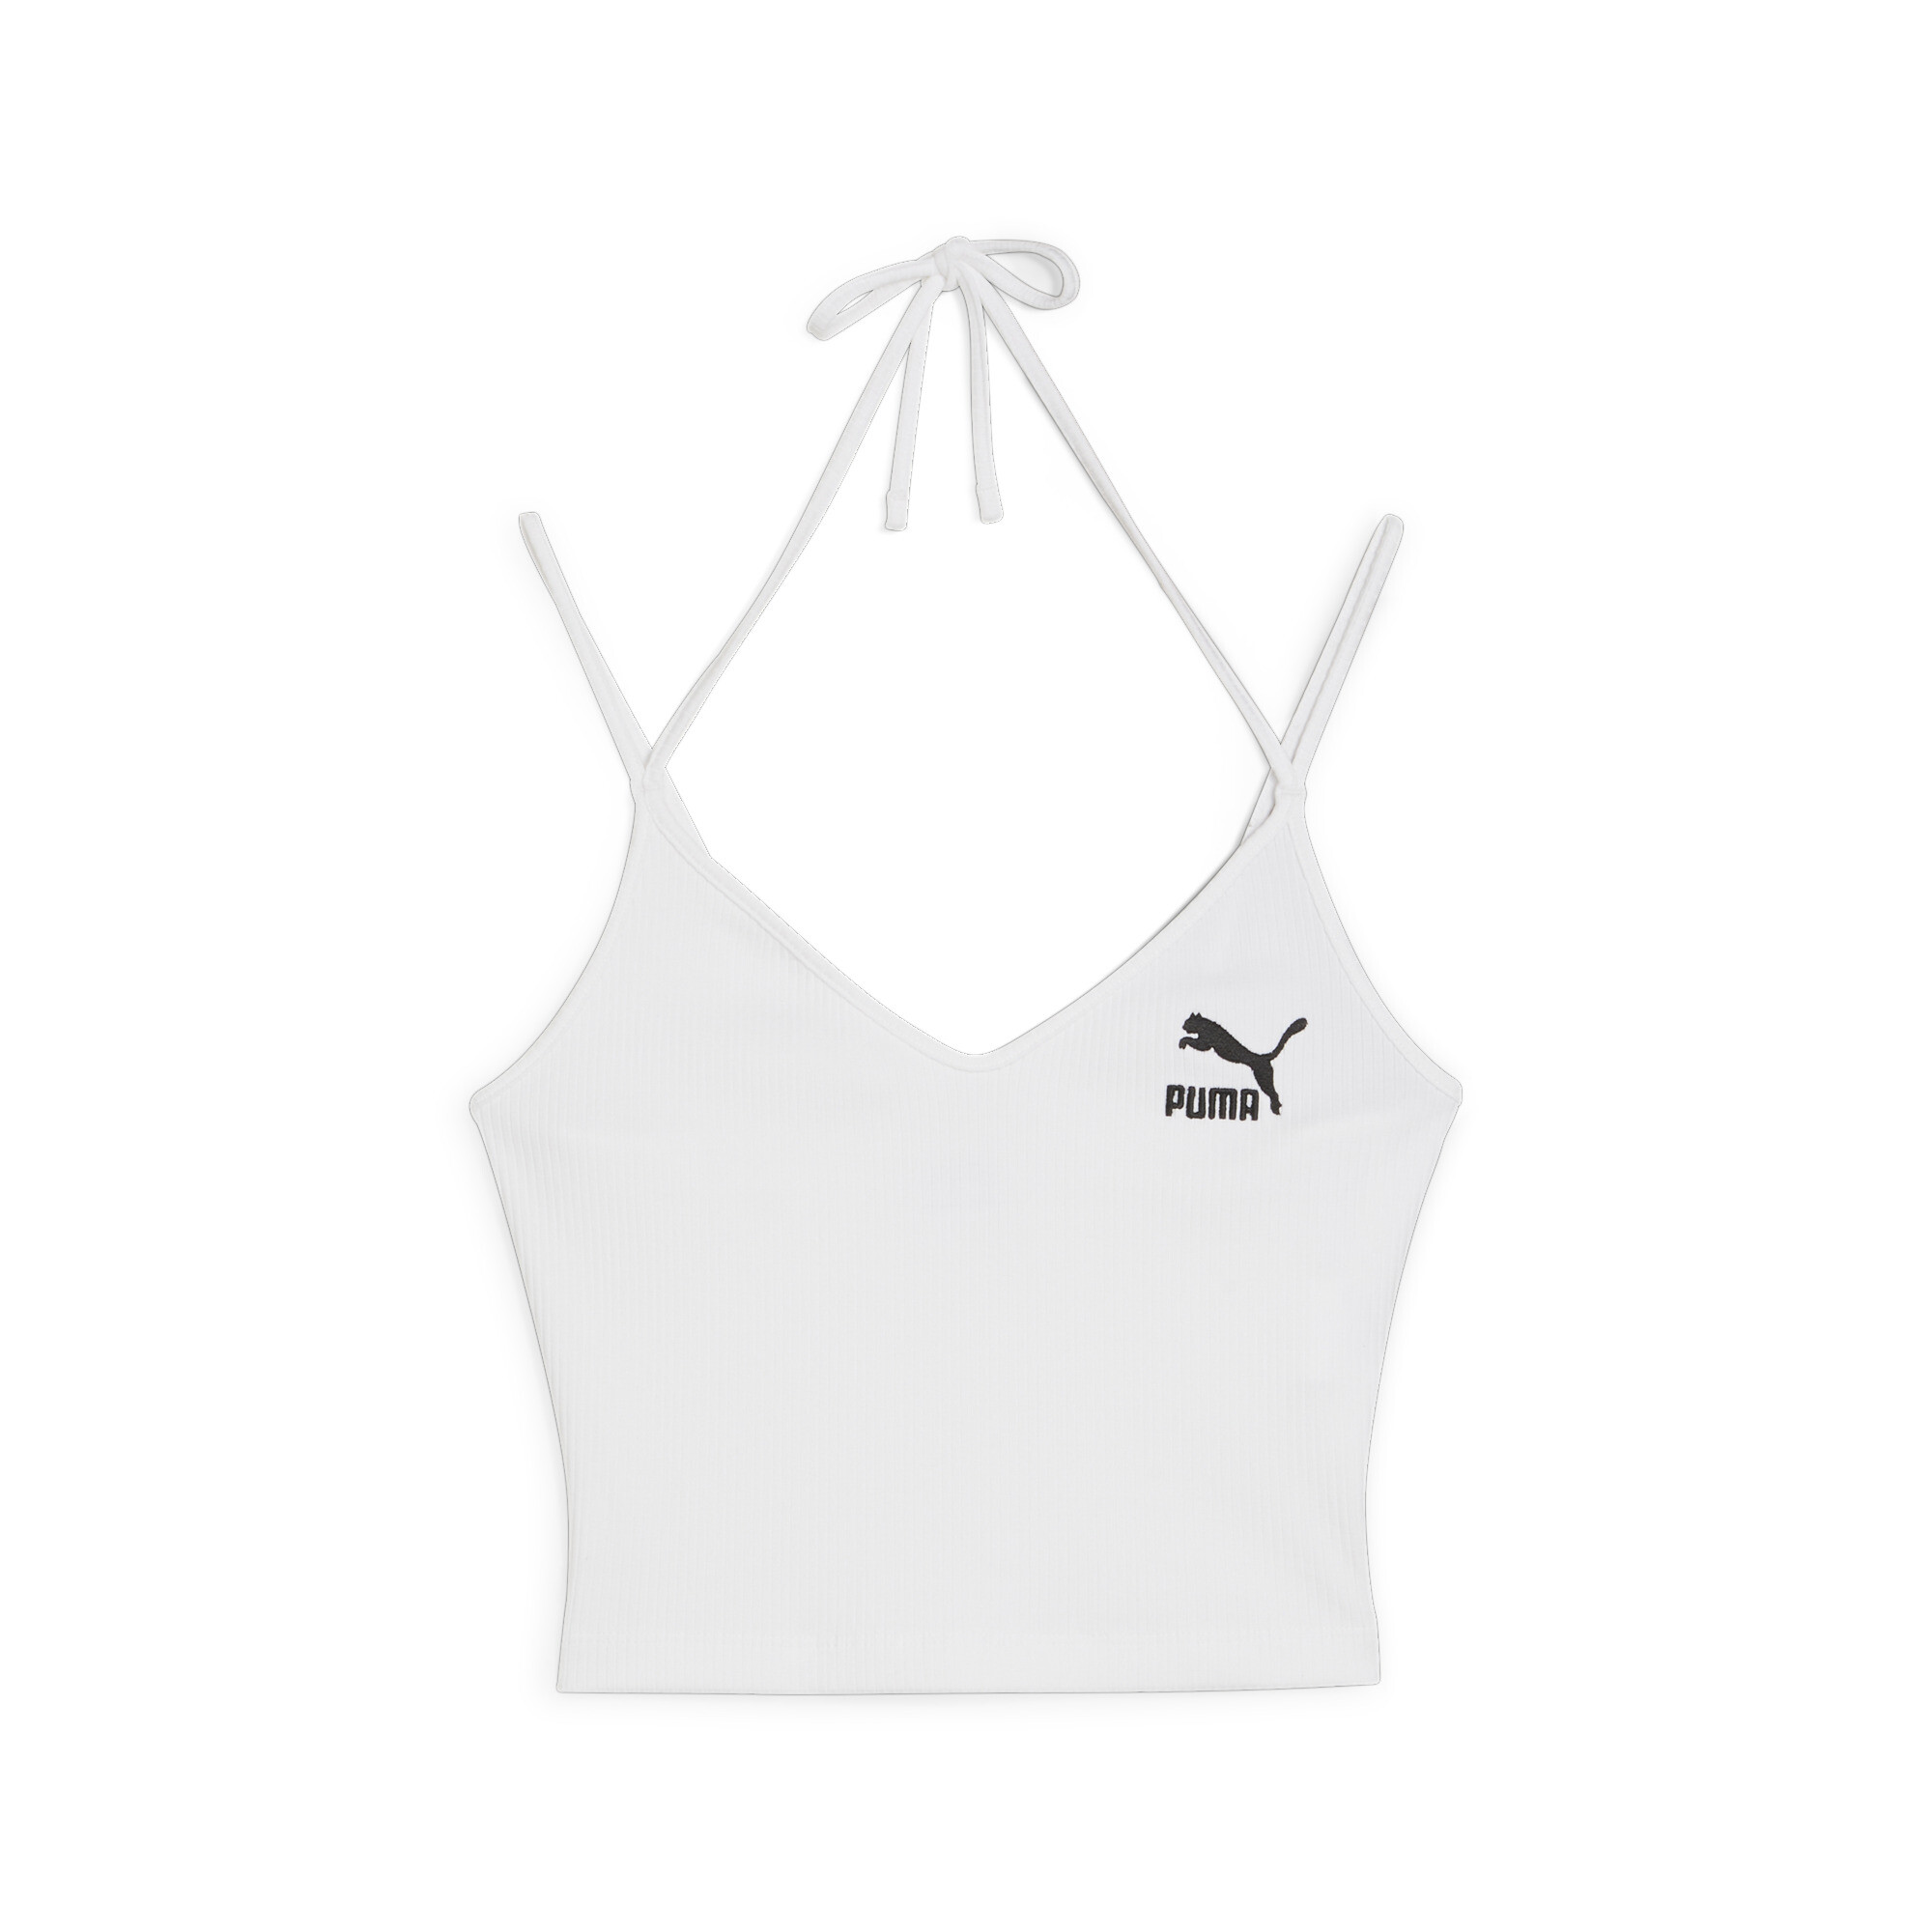 Women's PUMA CLASSICS Ribbed Crop Top In White, Size Large